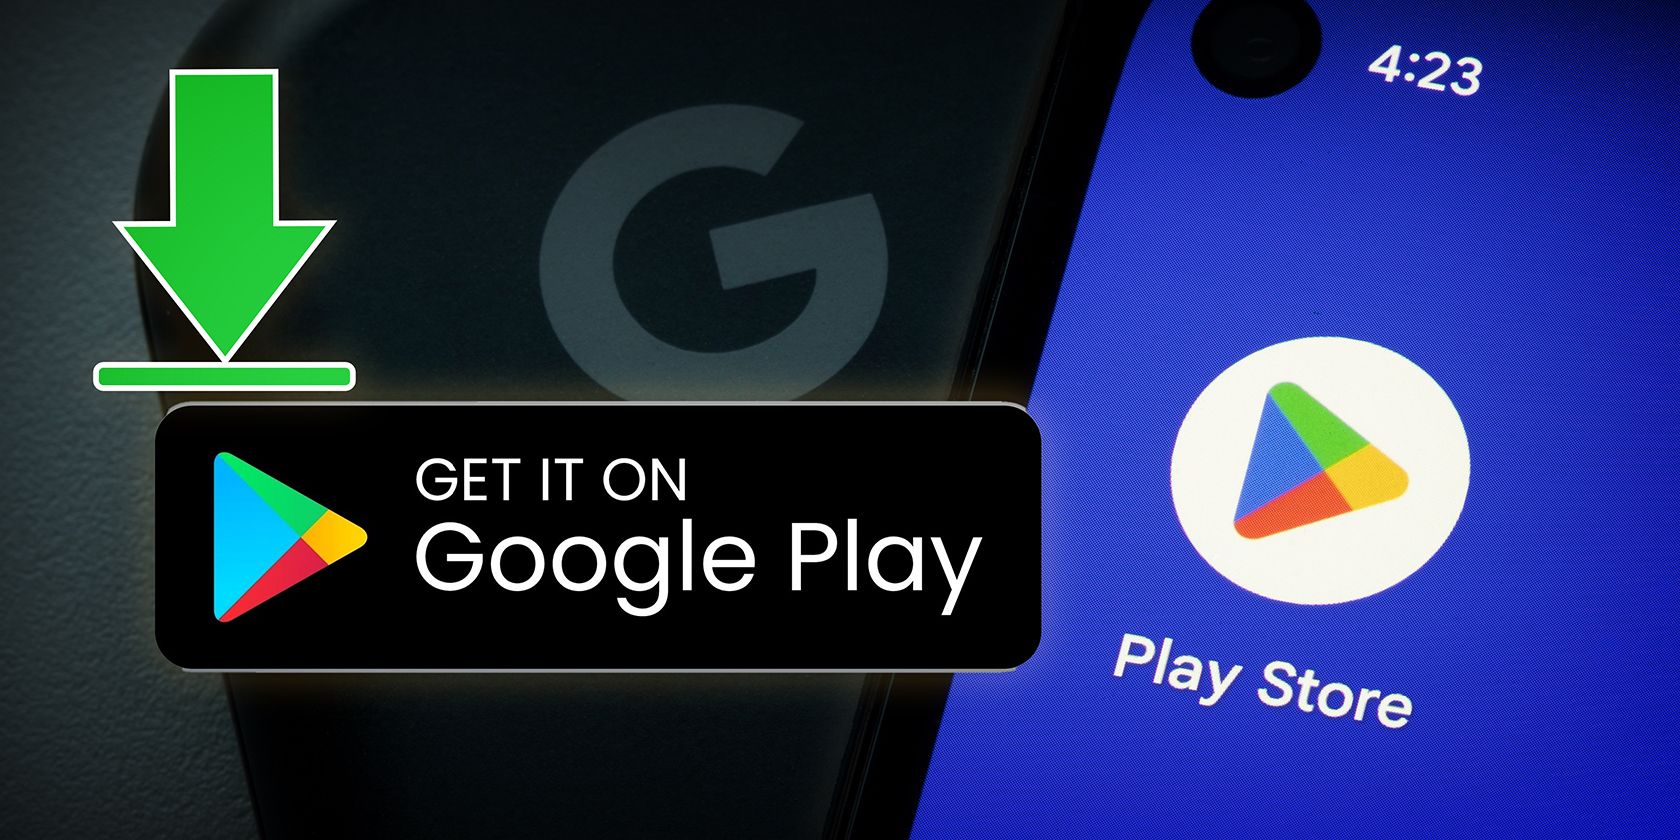 Smartphone screen displaying the Google Play Store logo with an arrow and the text 